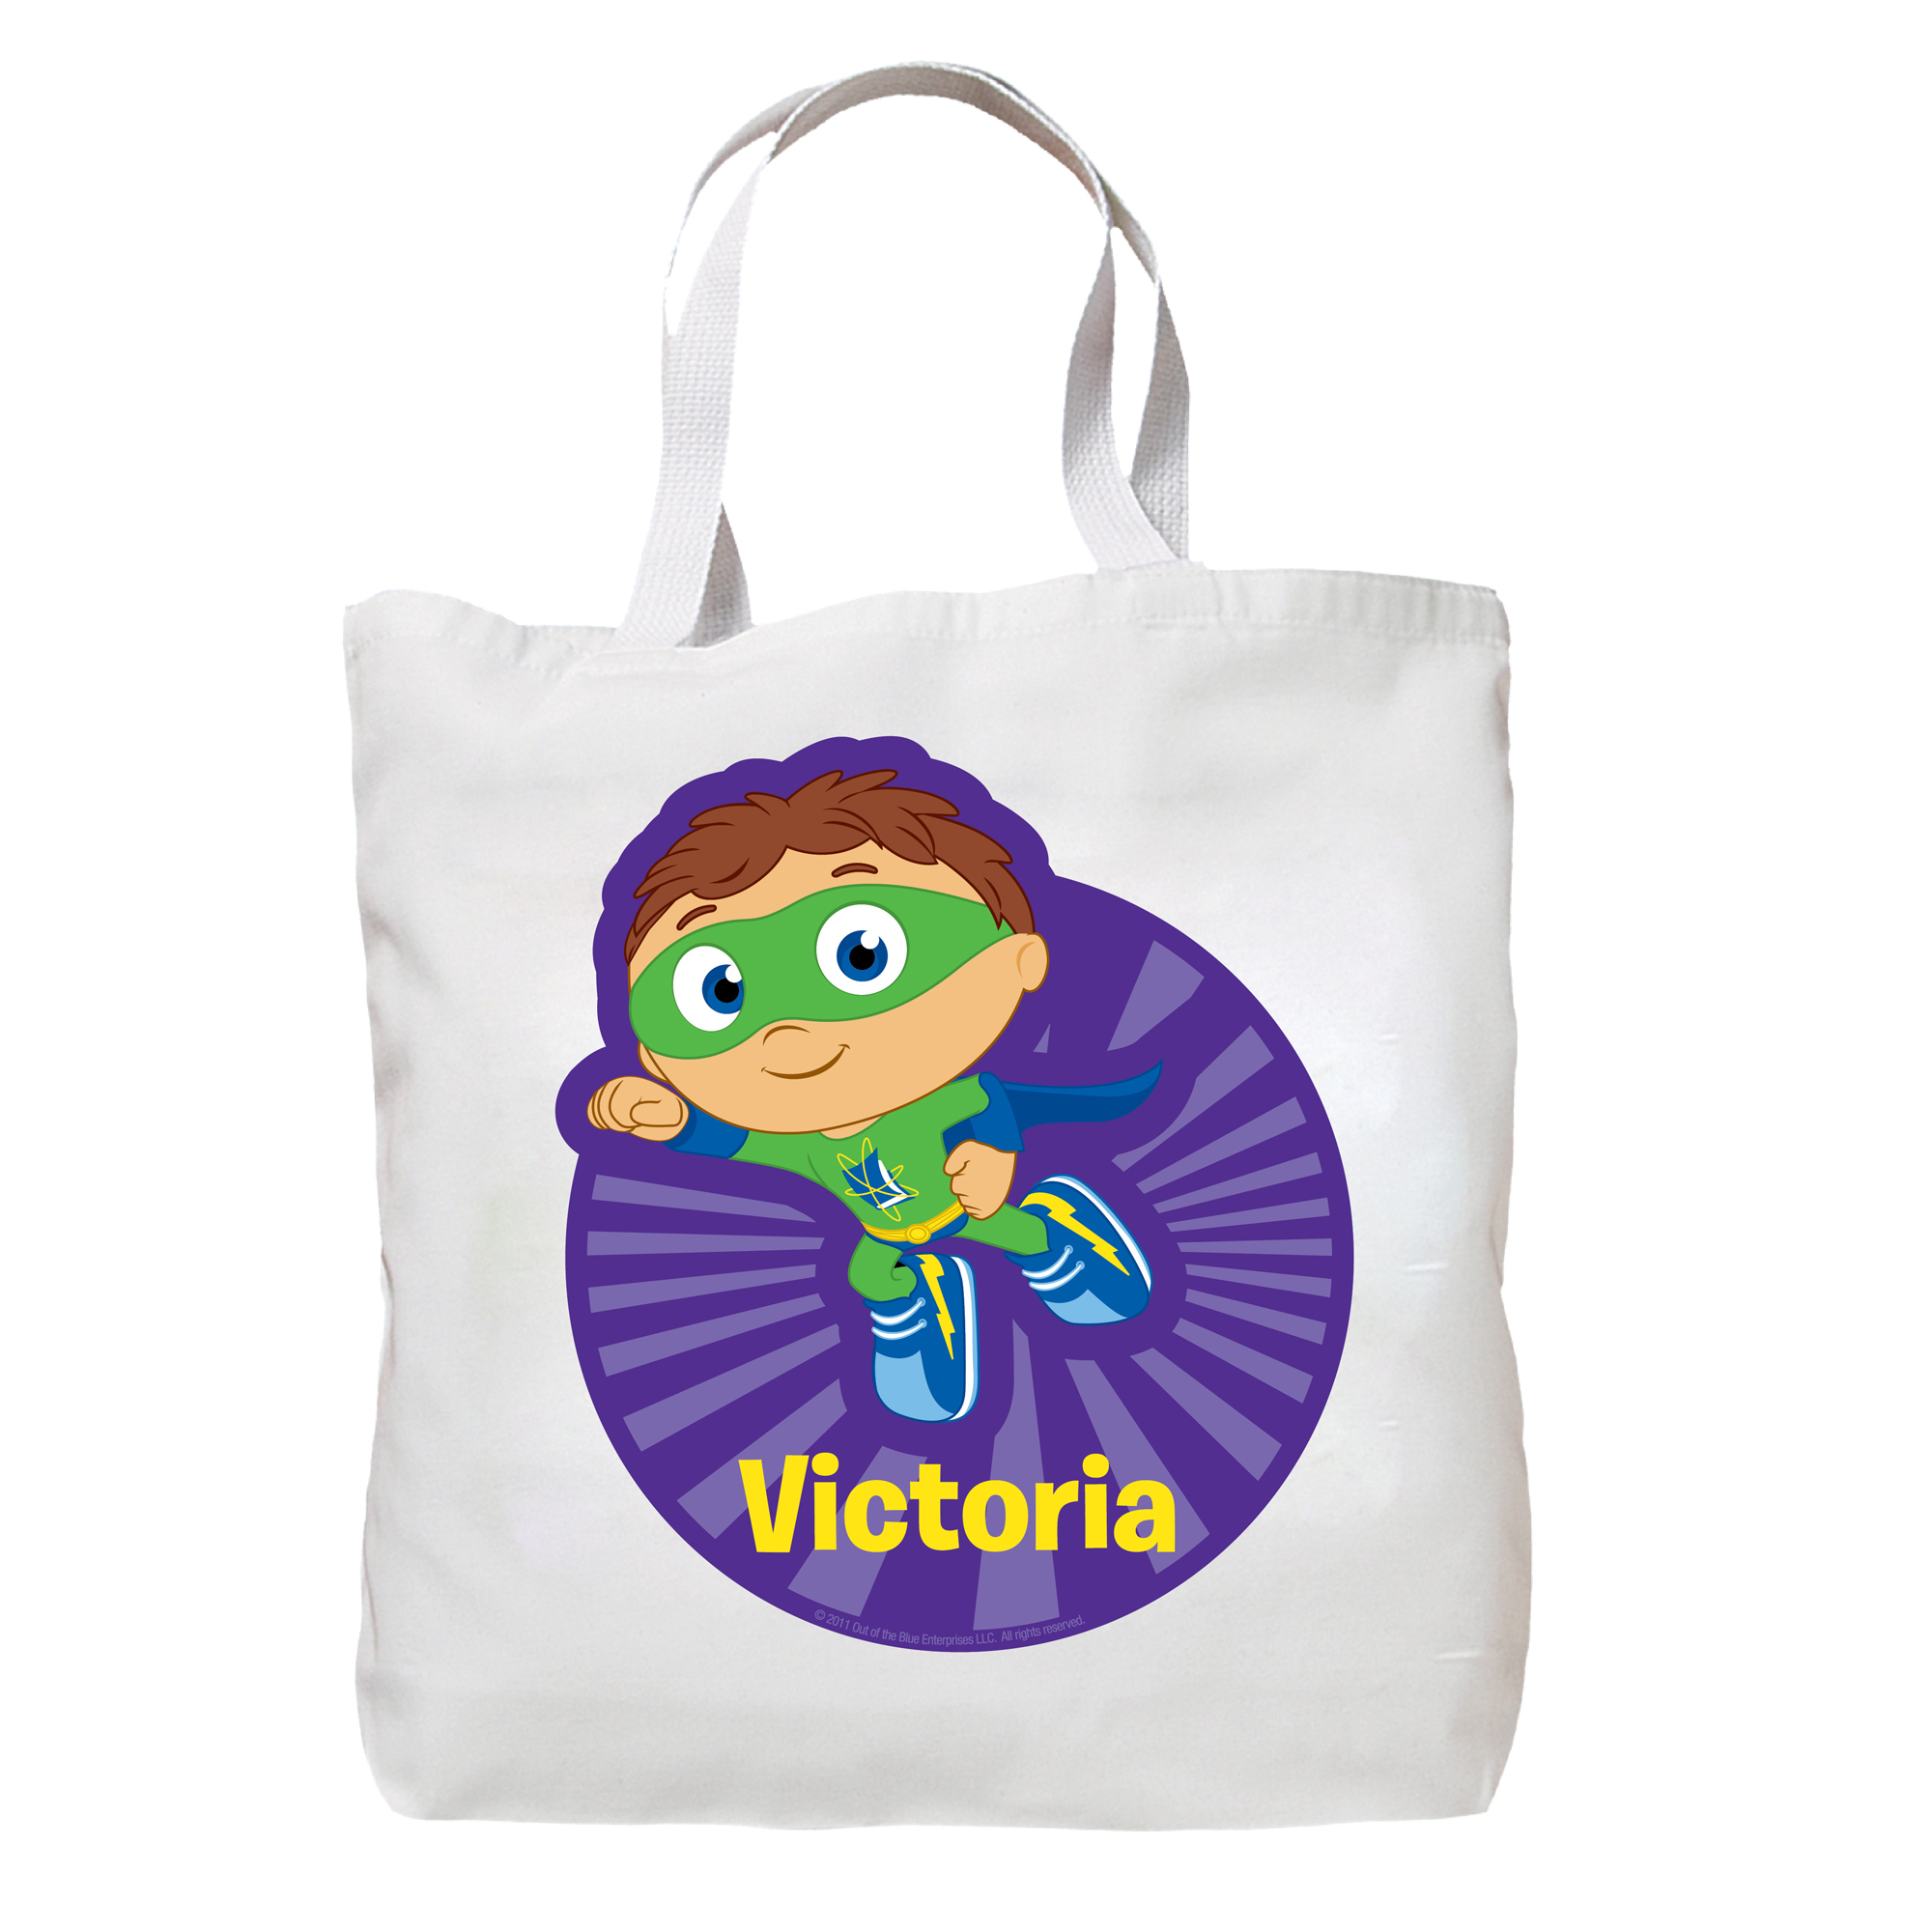 Super Why To The Rescue! Tote Bag